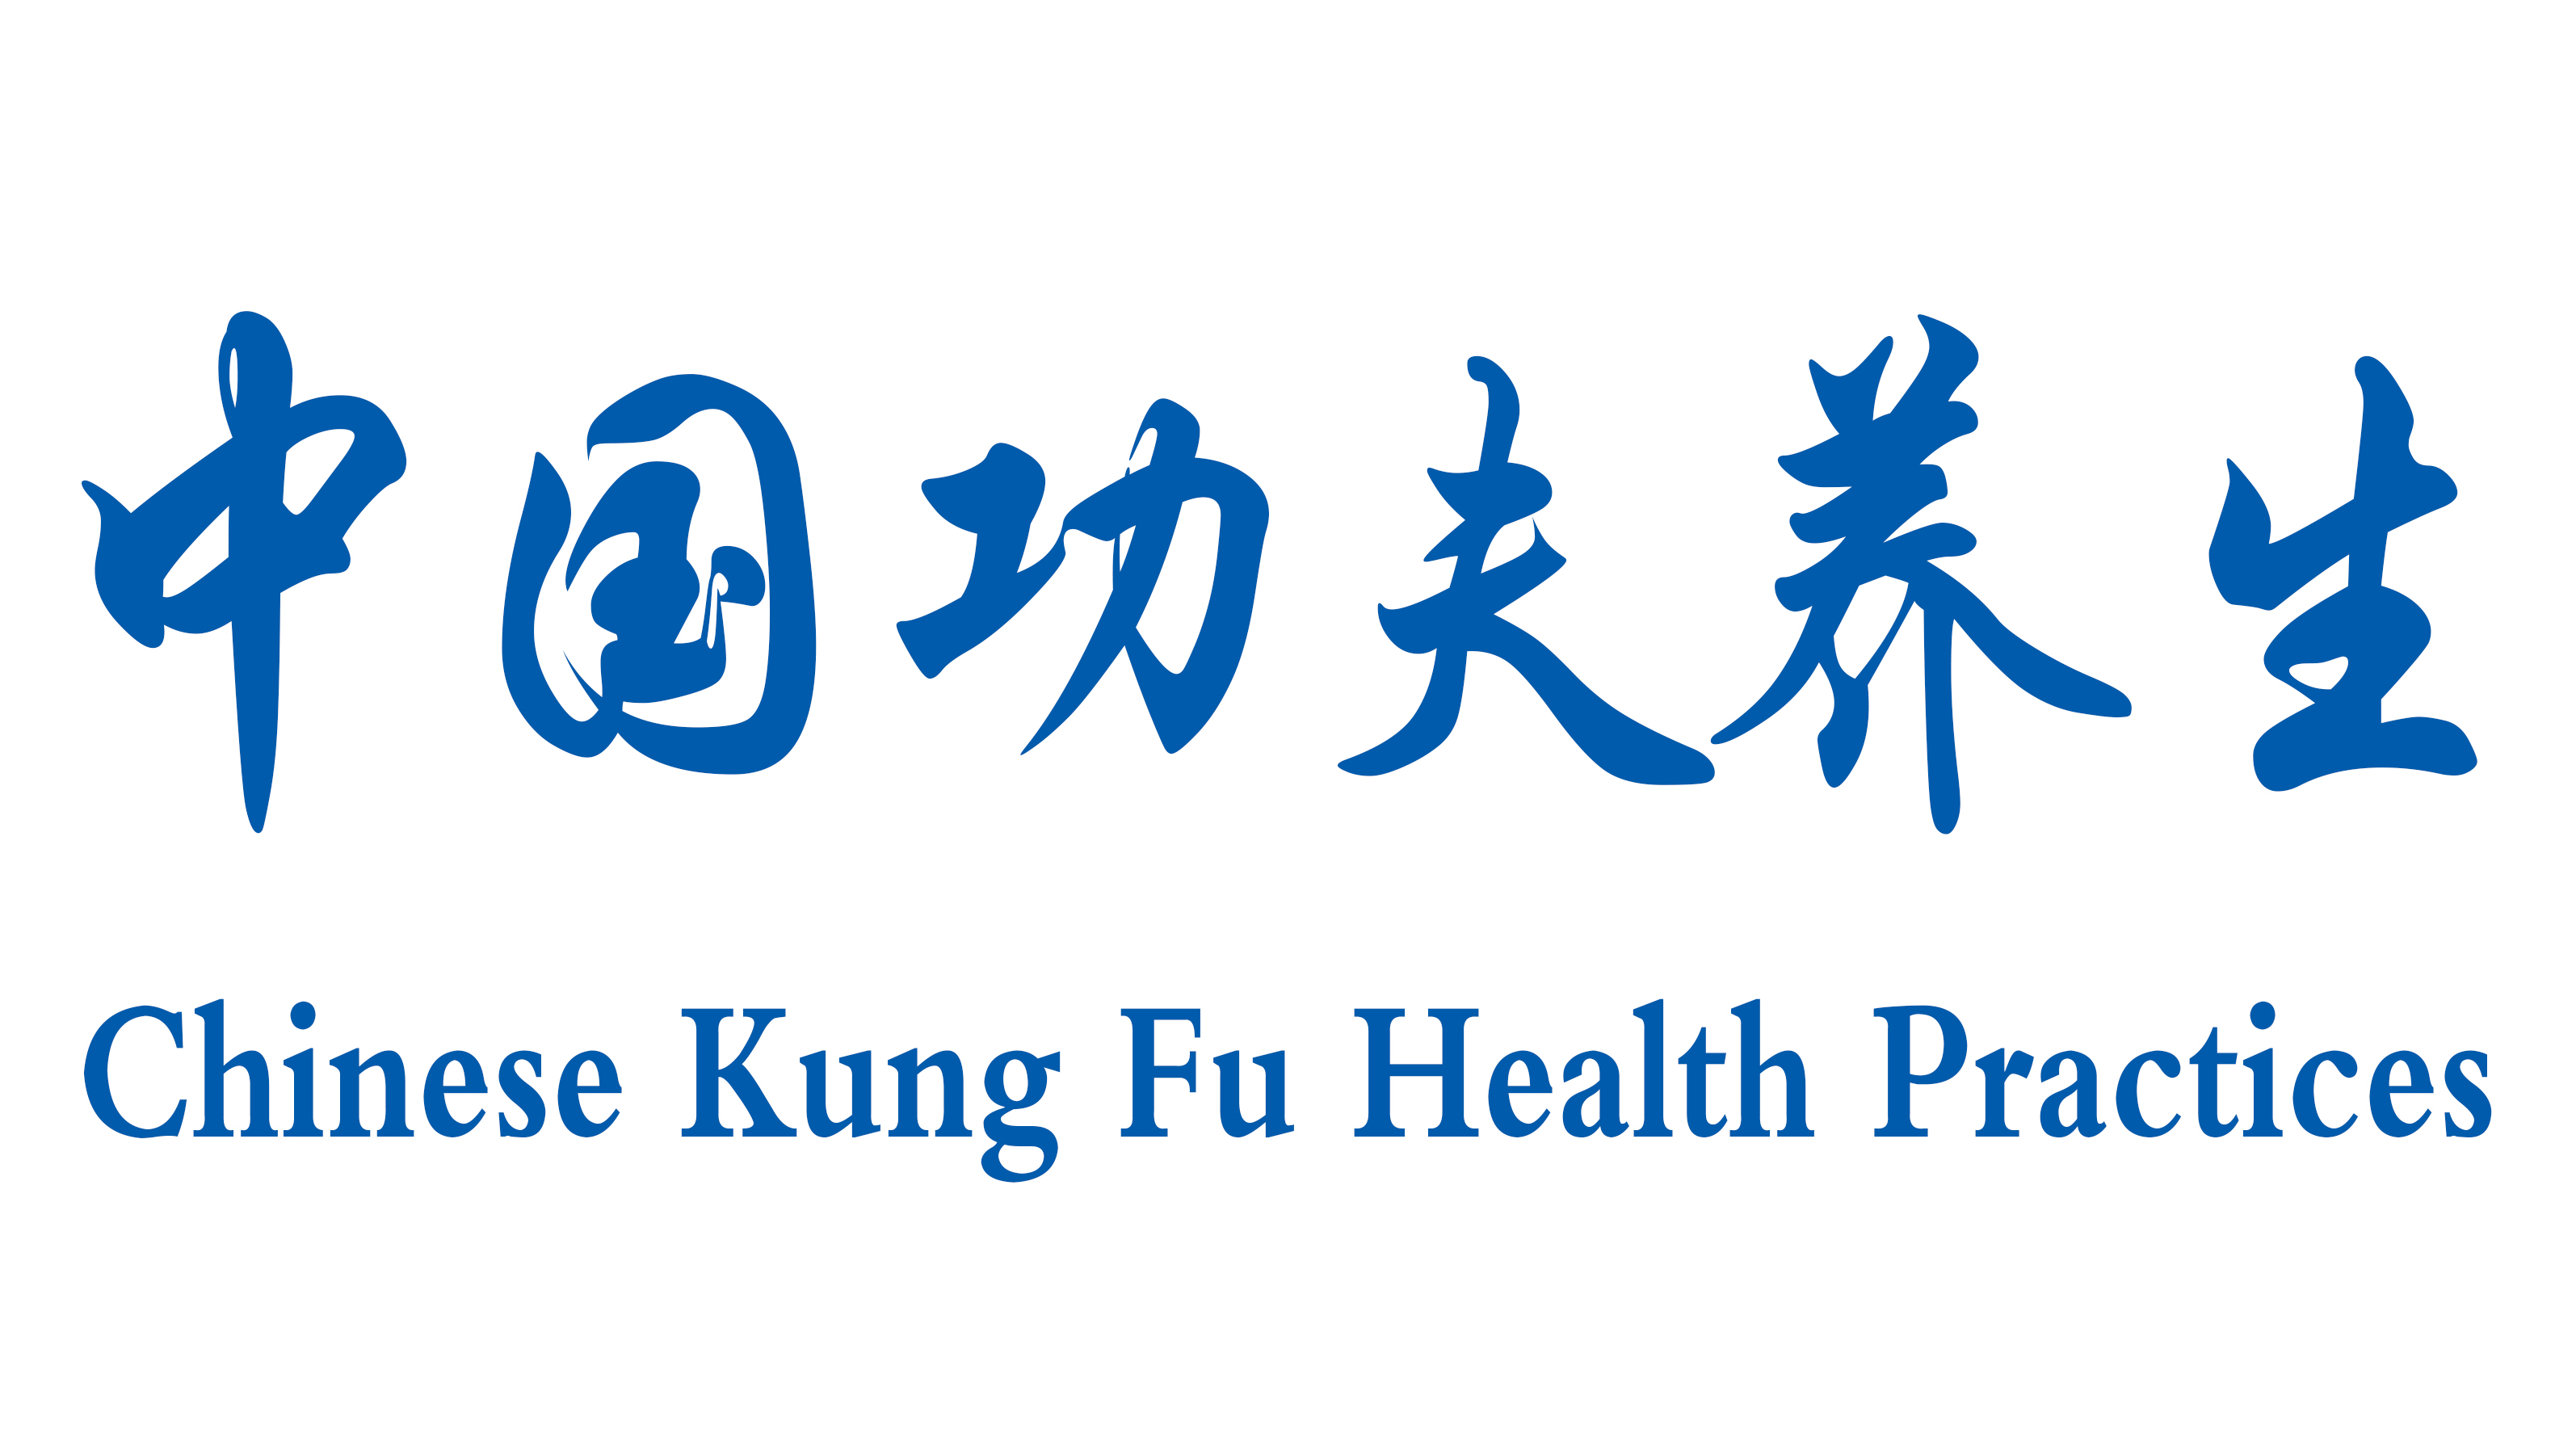 Chinese Kung Fu Health Practices